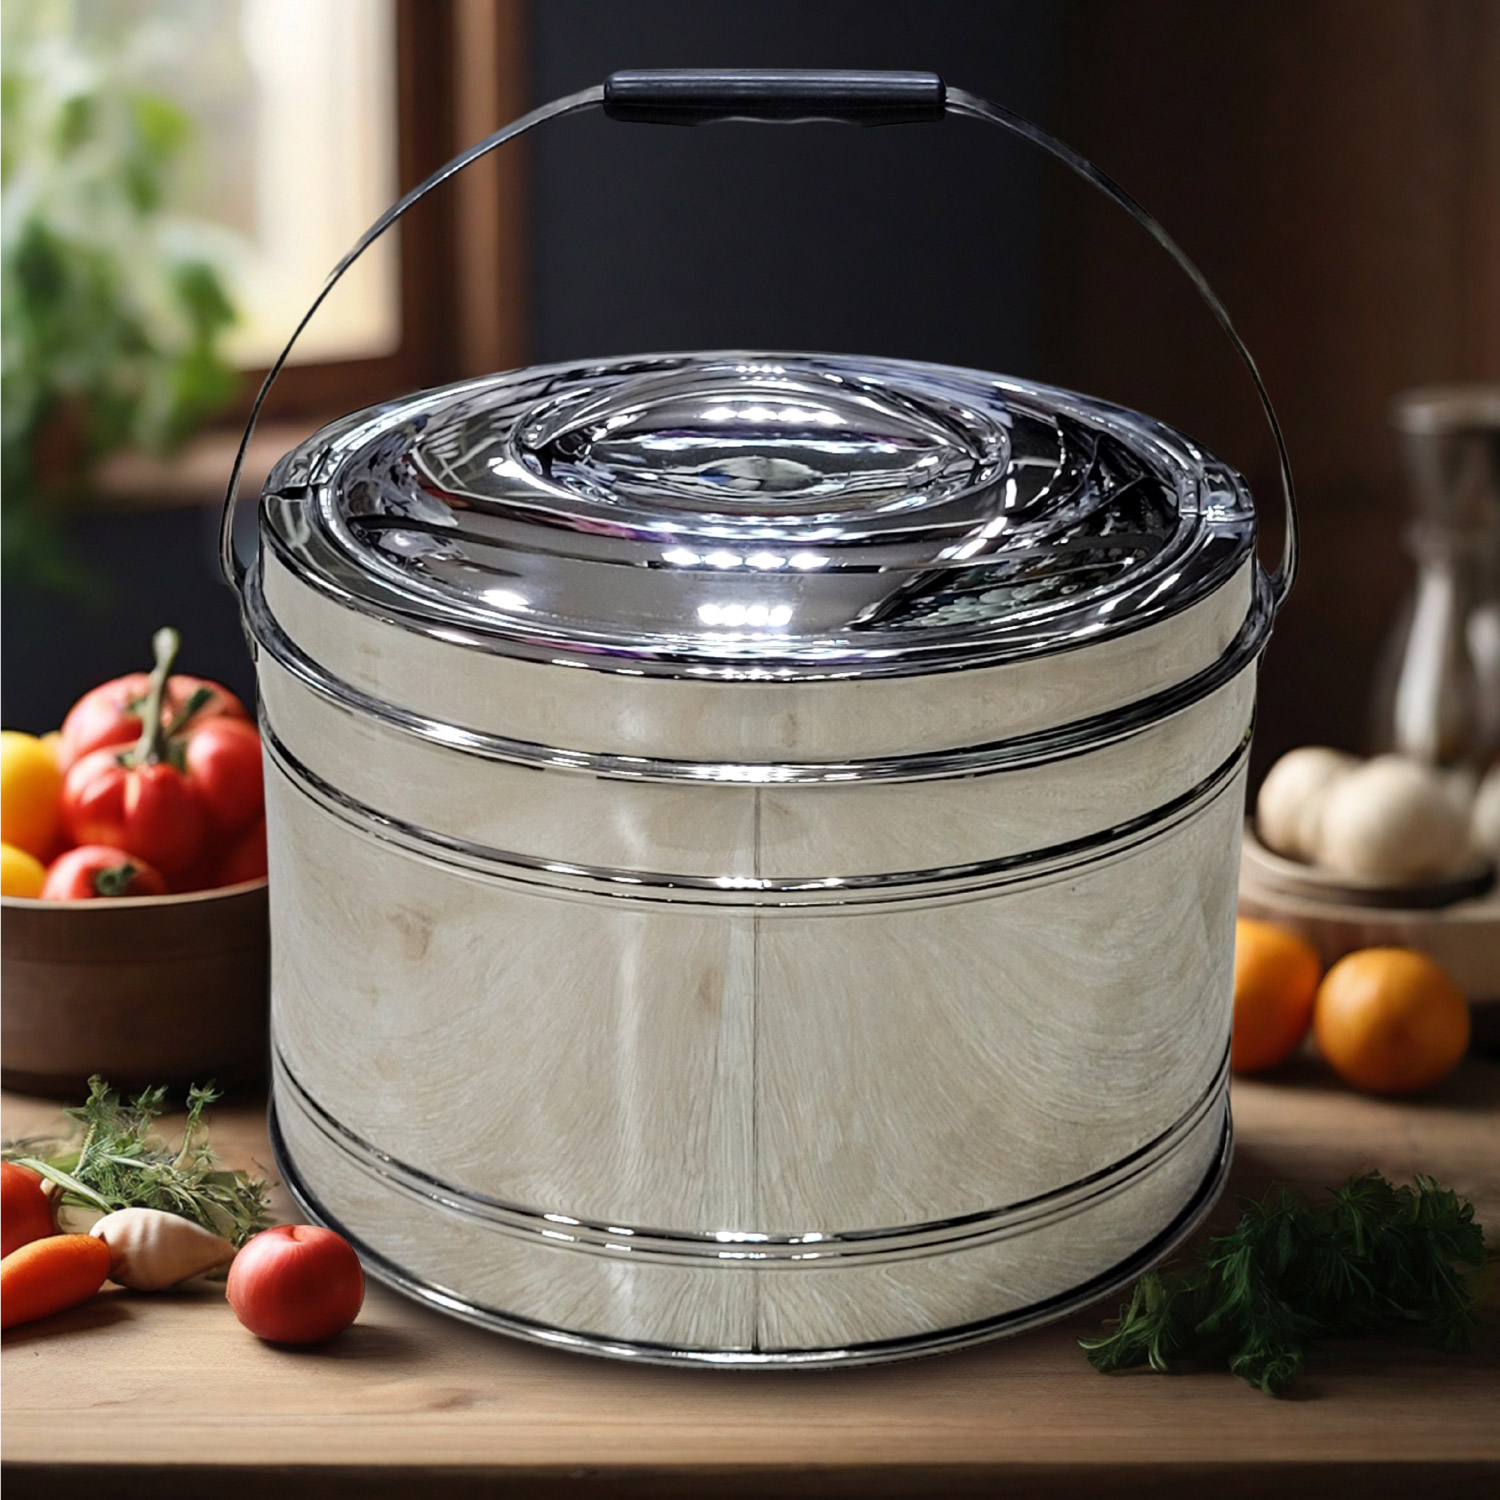 VINOD INSULATED FOOD STORAGE CONTAINERS 7.5 LTR